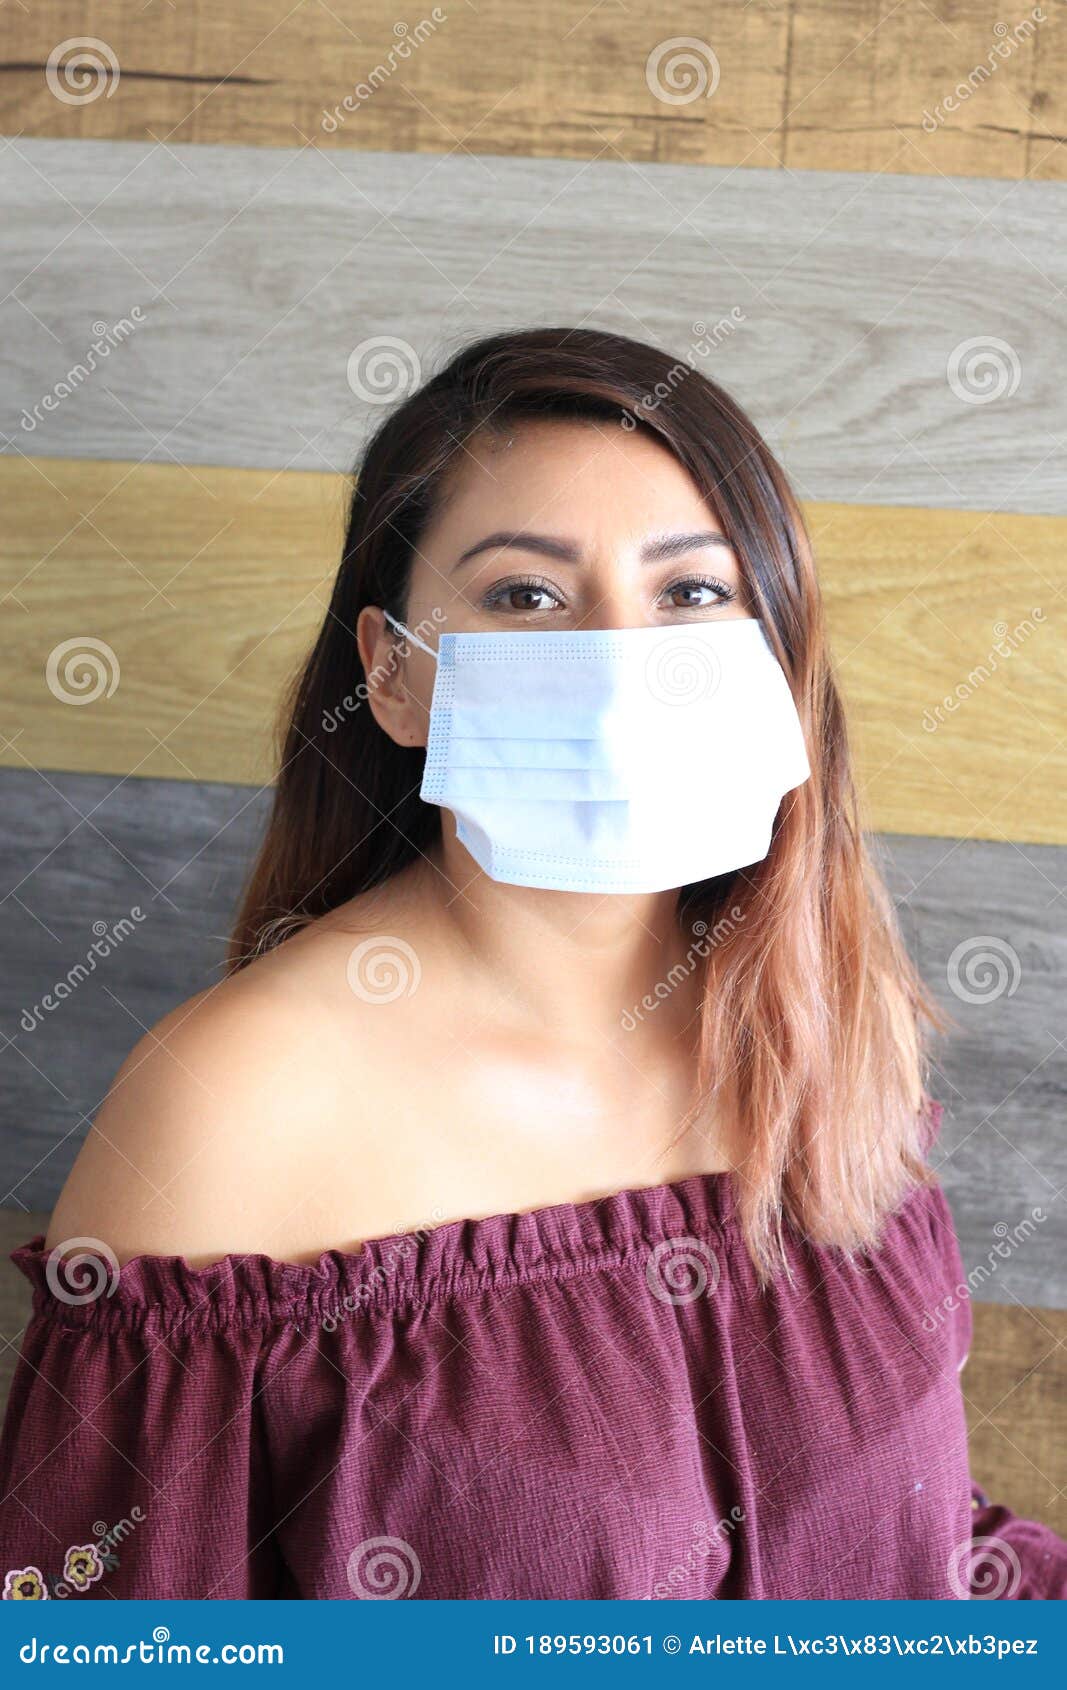 young latin woman with multilayer face masks for clinical use to prevent covid